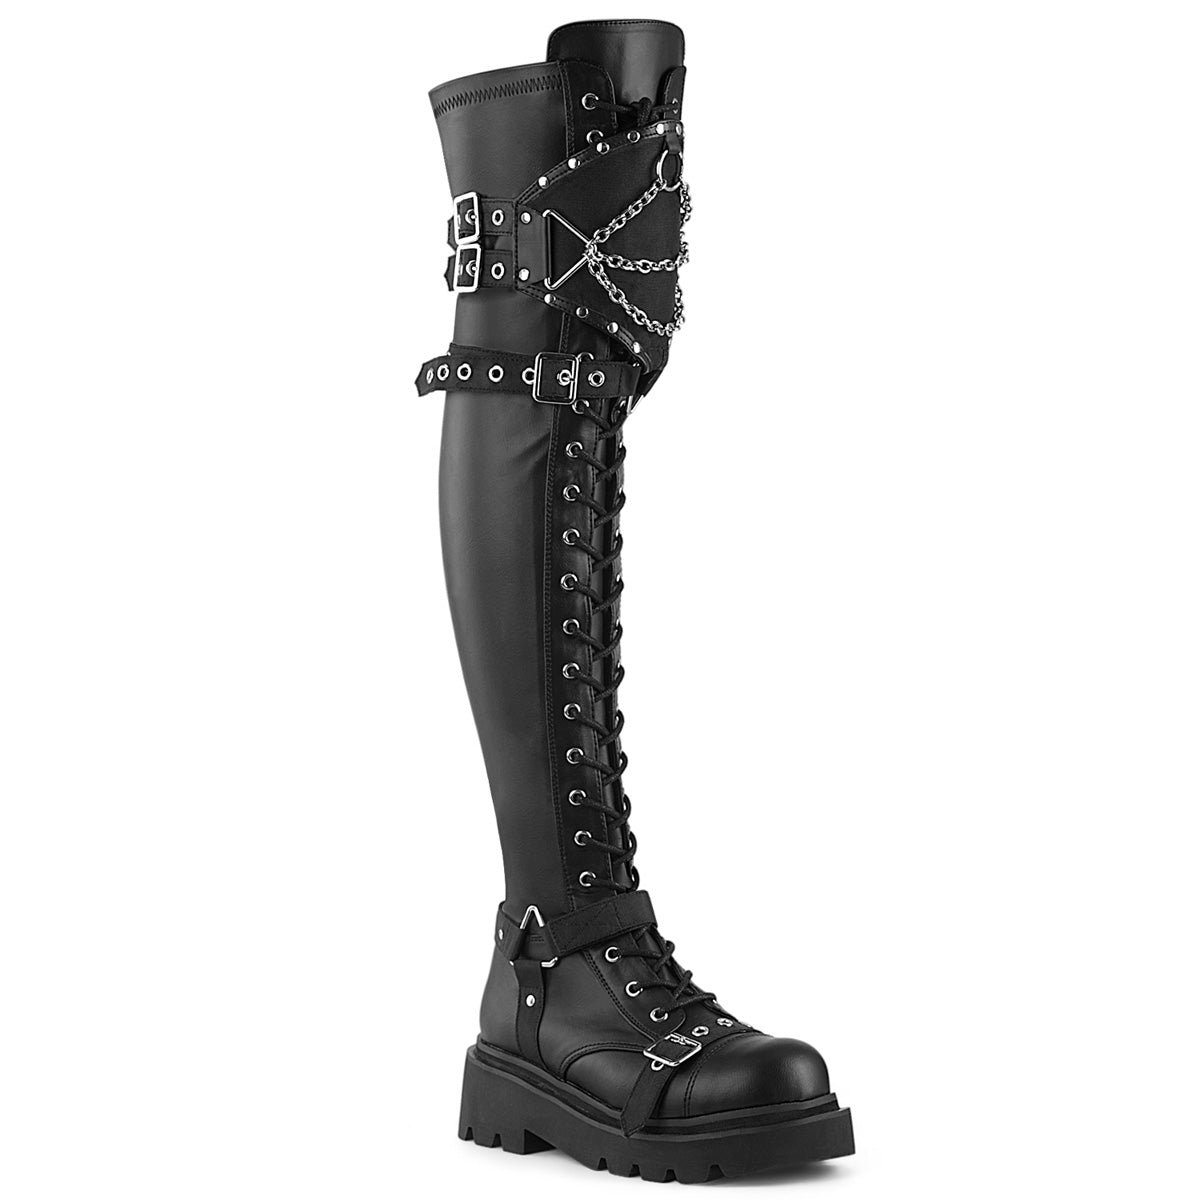 RENEGADE-320 Over-The-Knee Boots by Demonia